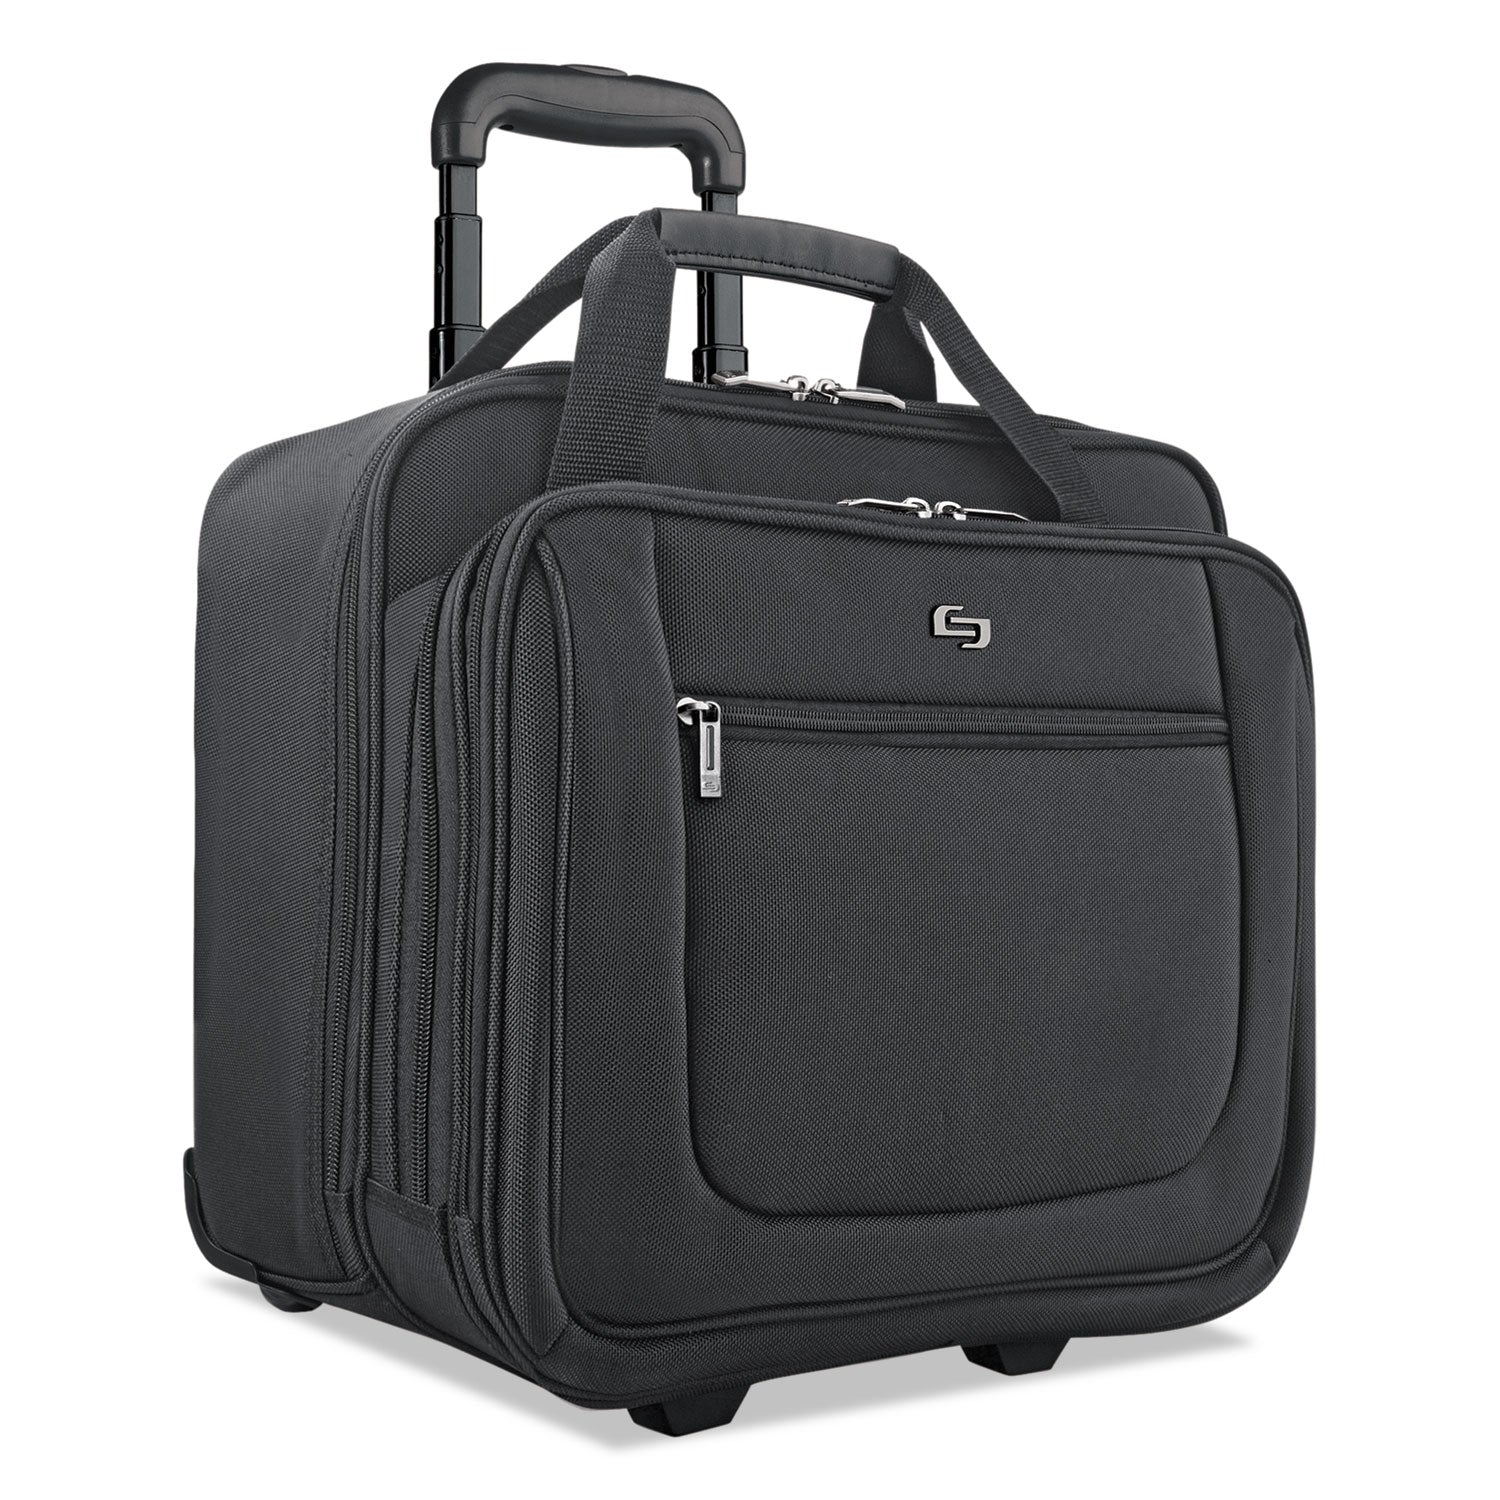 Classic Rolling Case, Fits Devices Up to 17.3", Polyester, 17.5 x 9 x 14, Black - 